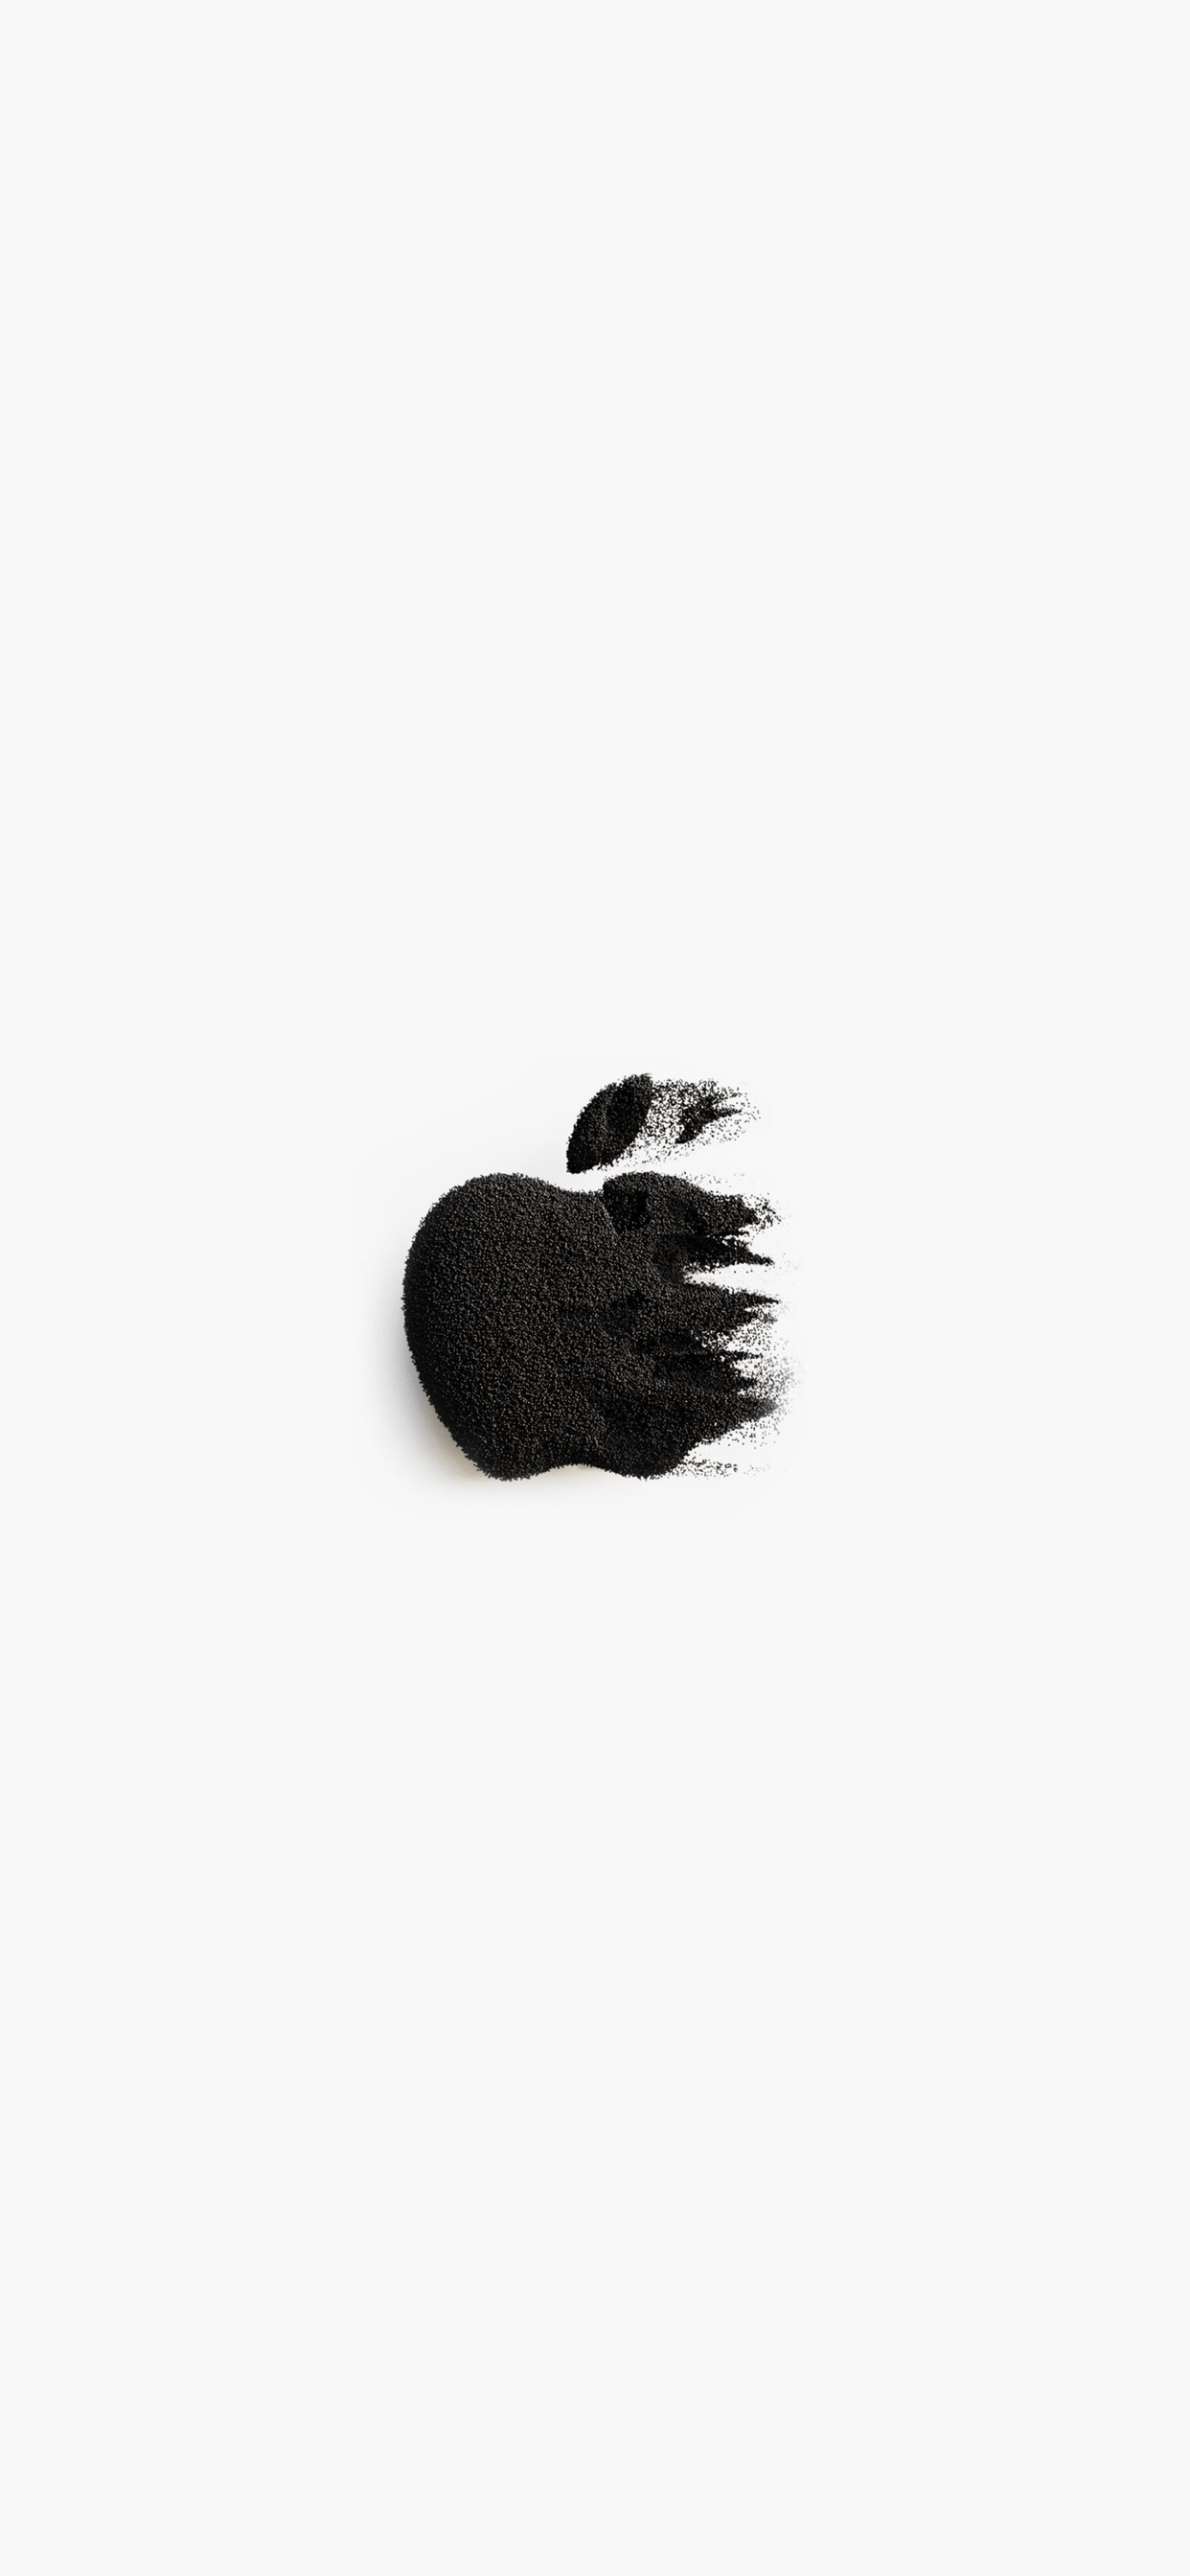 There's more in the making: 33 Apple logo wallpaper